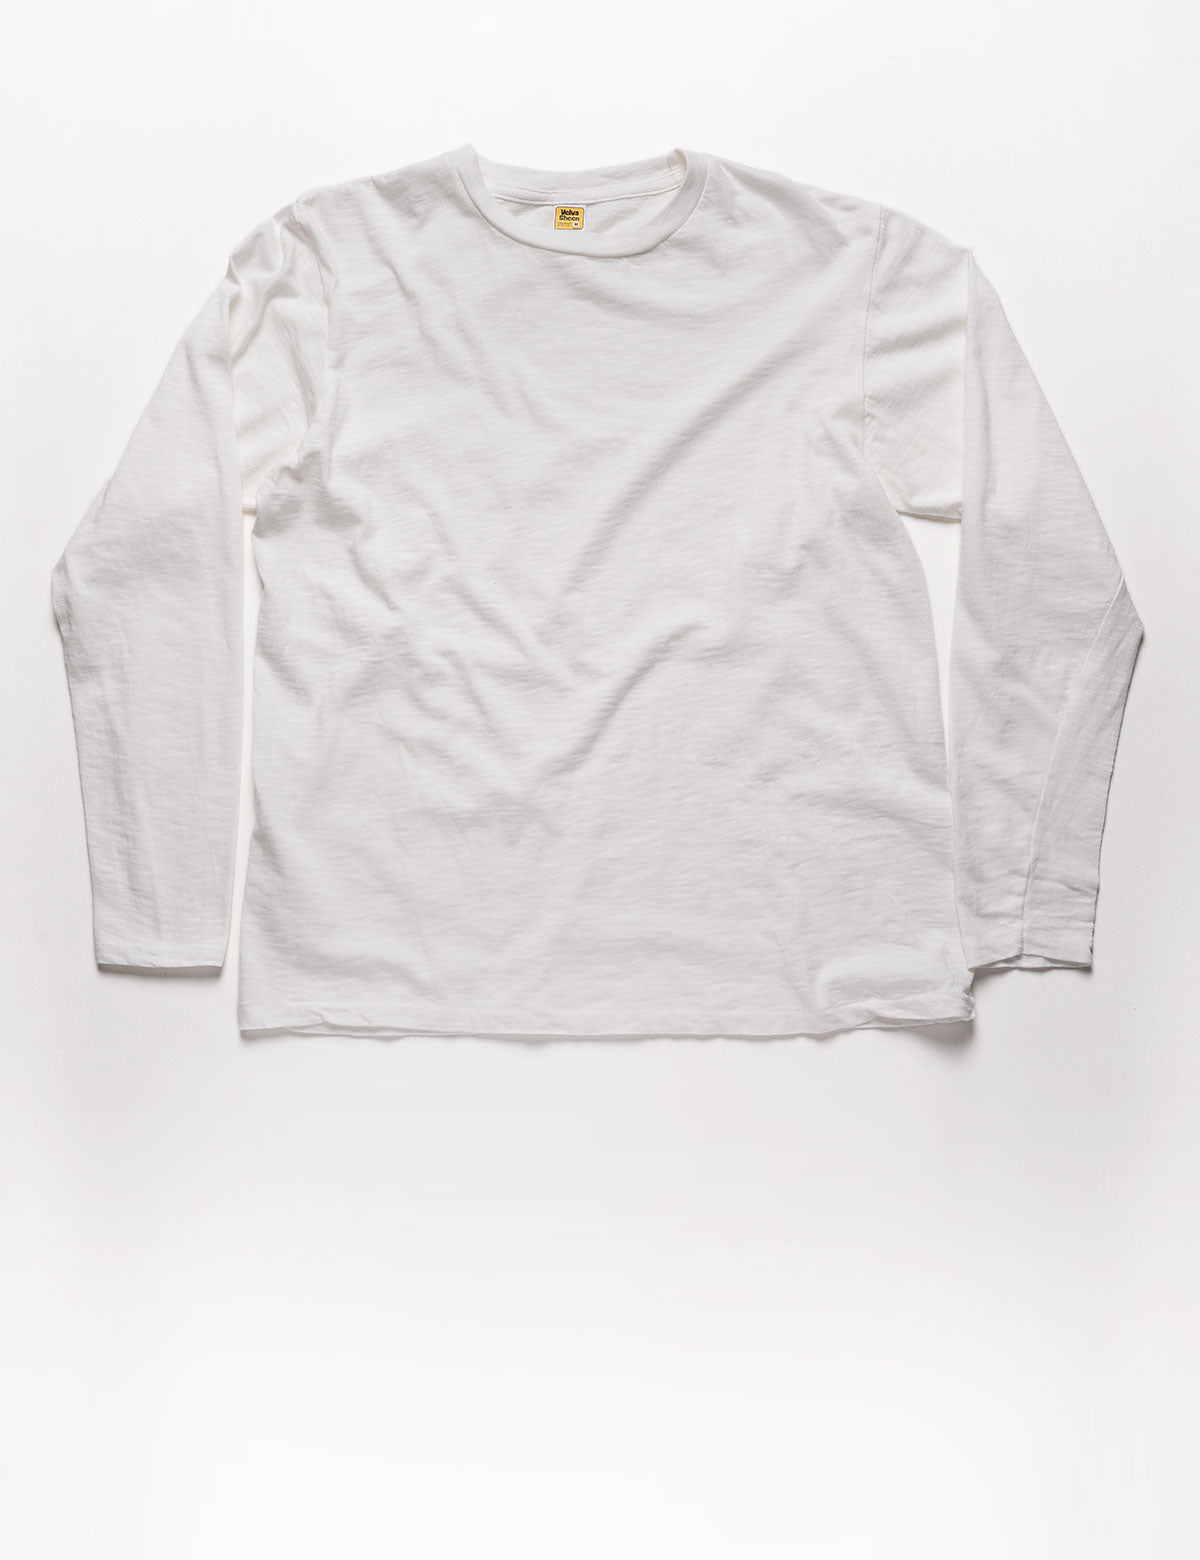 Long Sleeve Crewneck T-Shirt in White